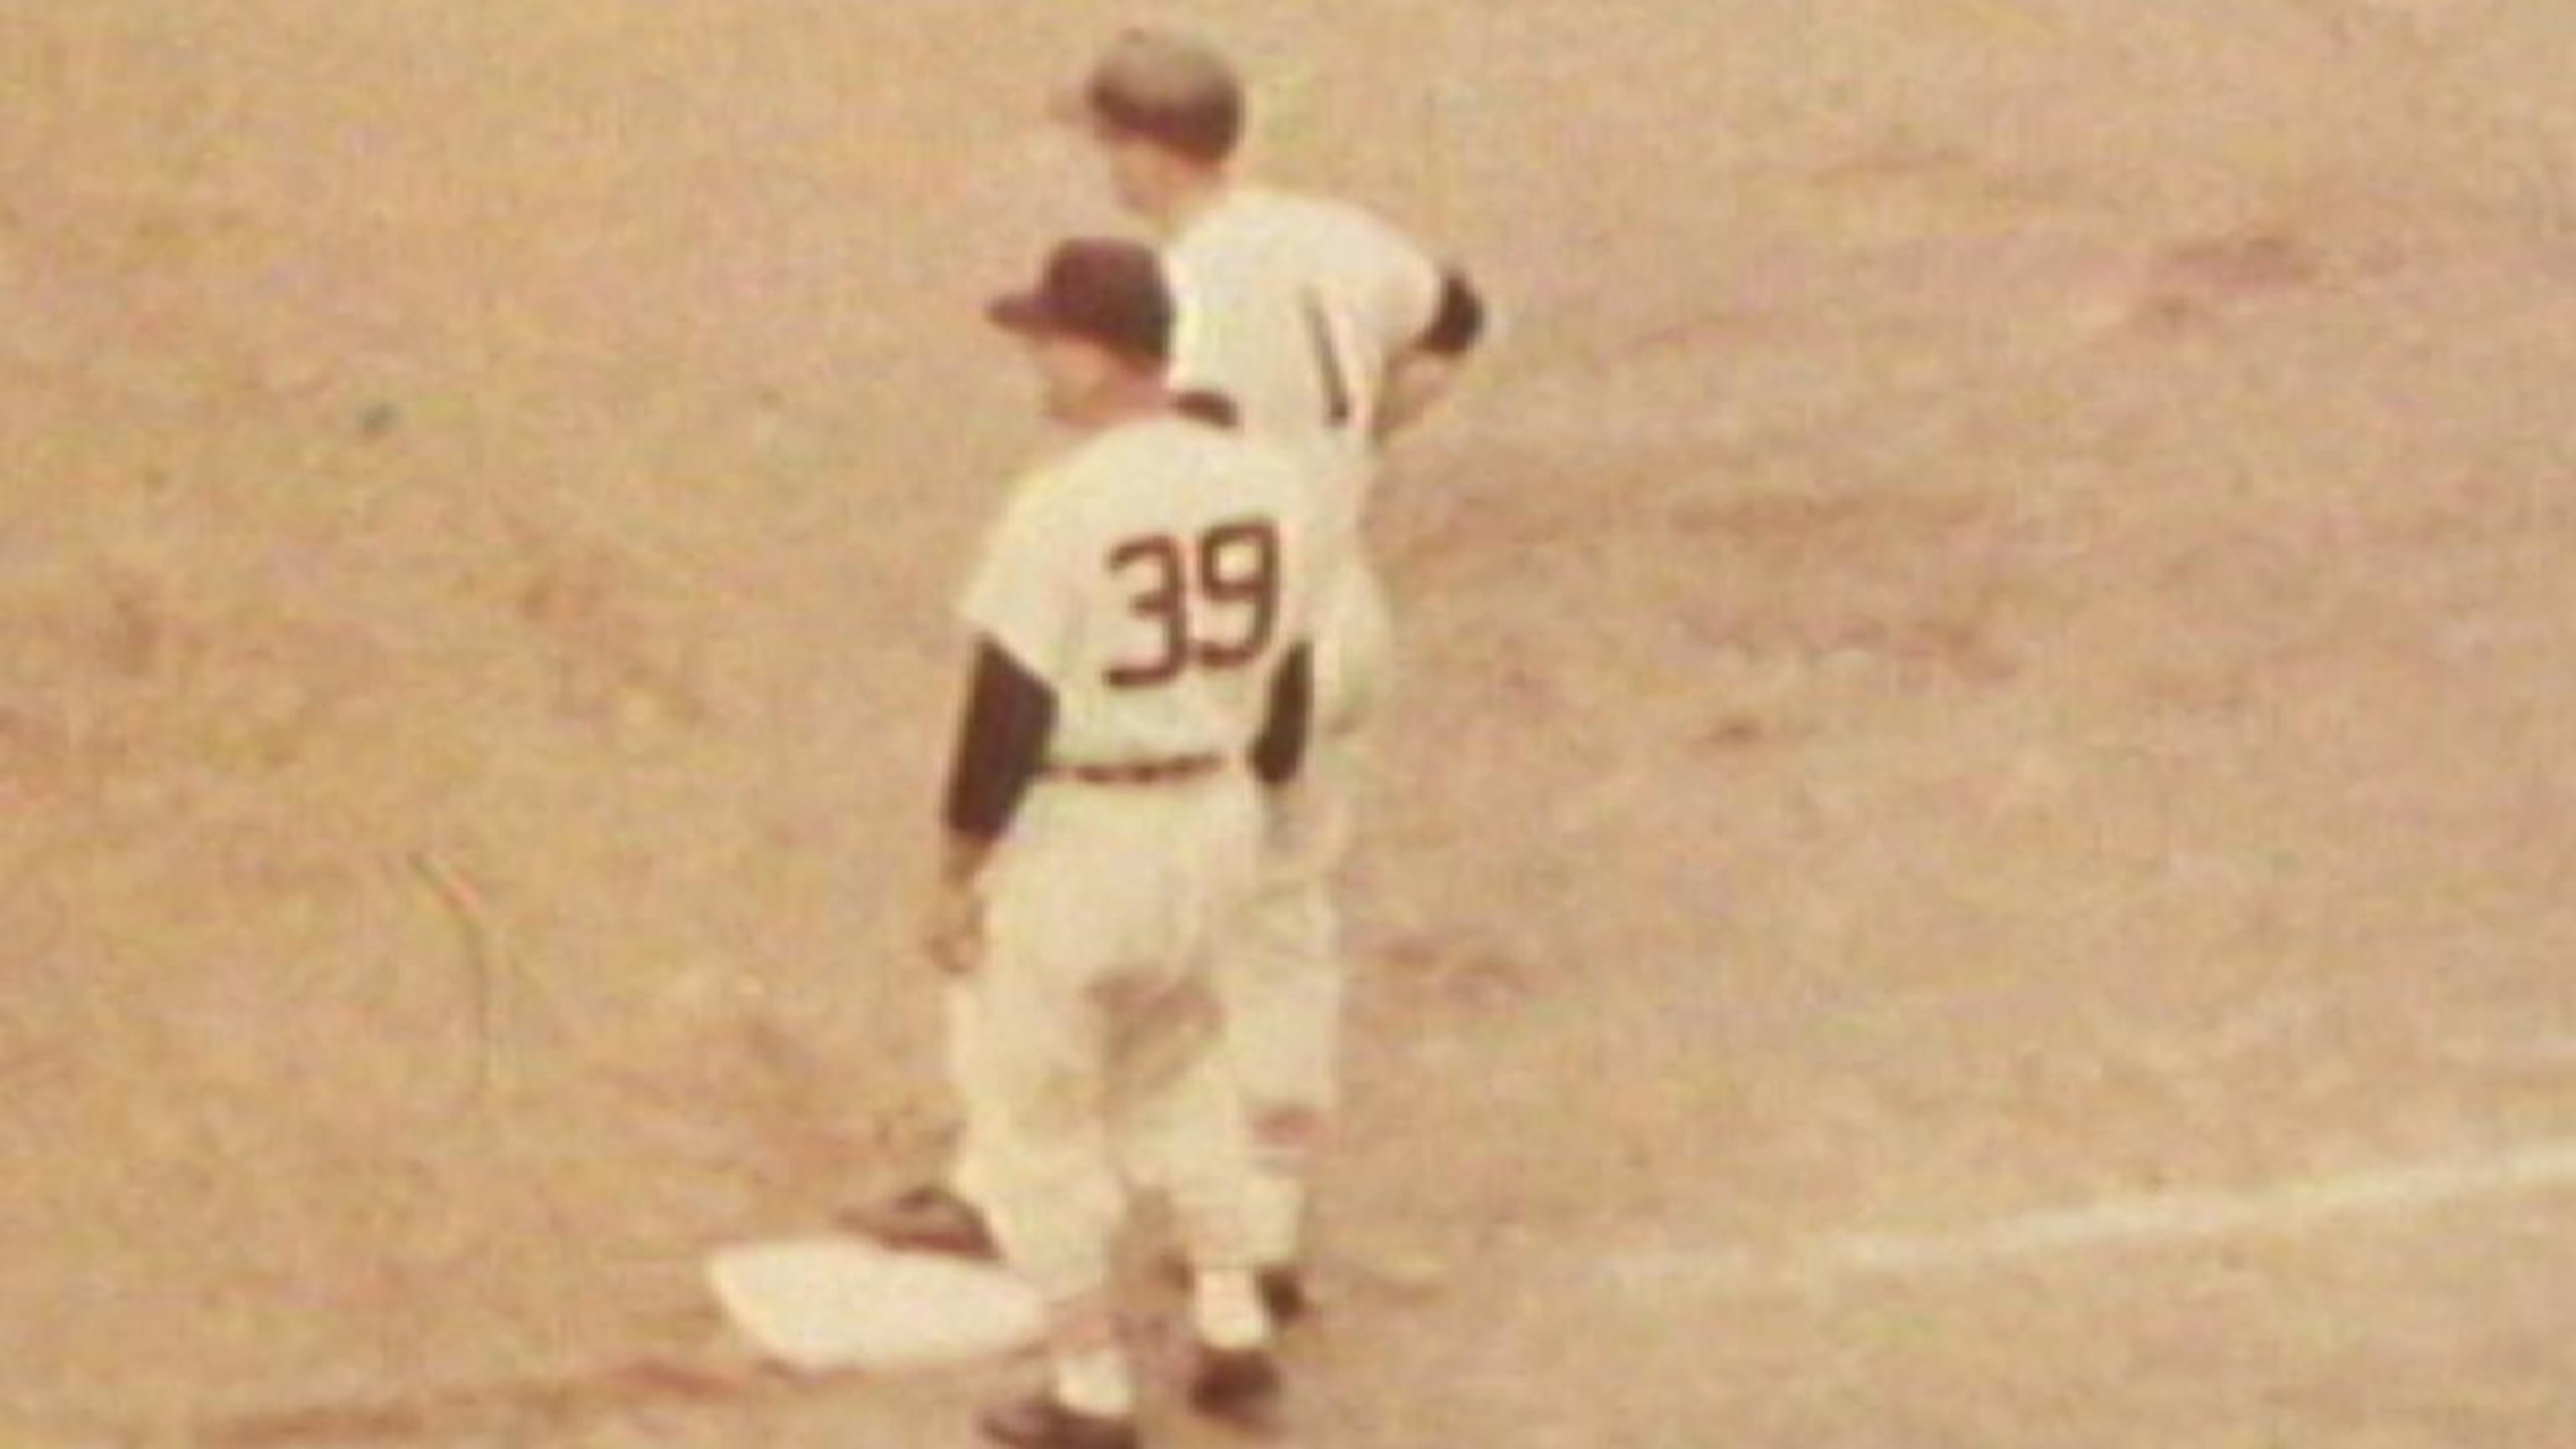 Early Wynn, the Go-Go White Sox and the 1959 World Series